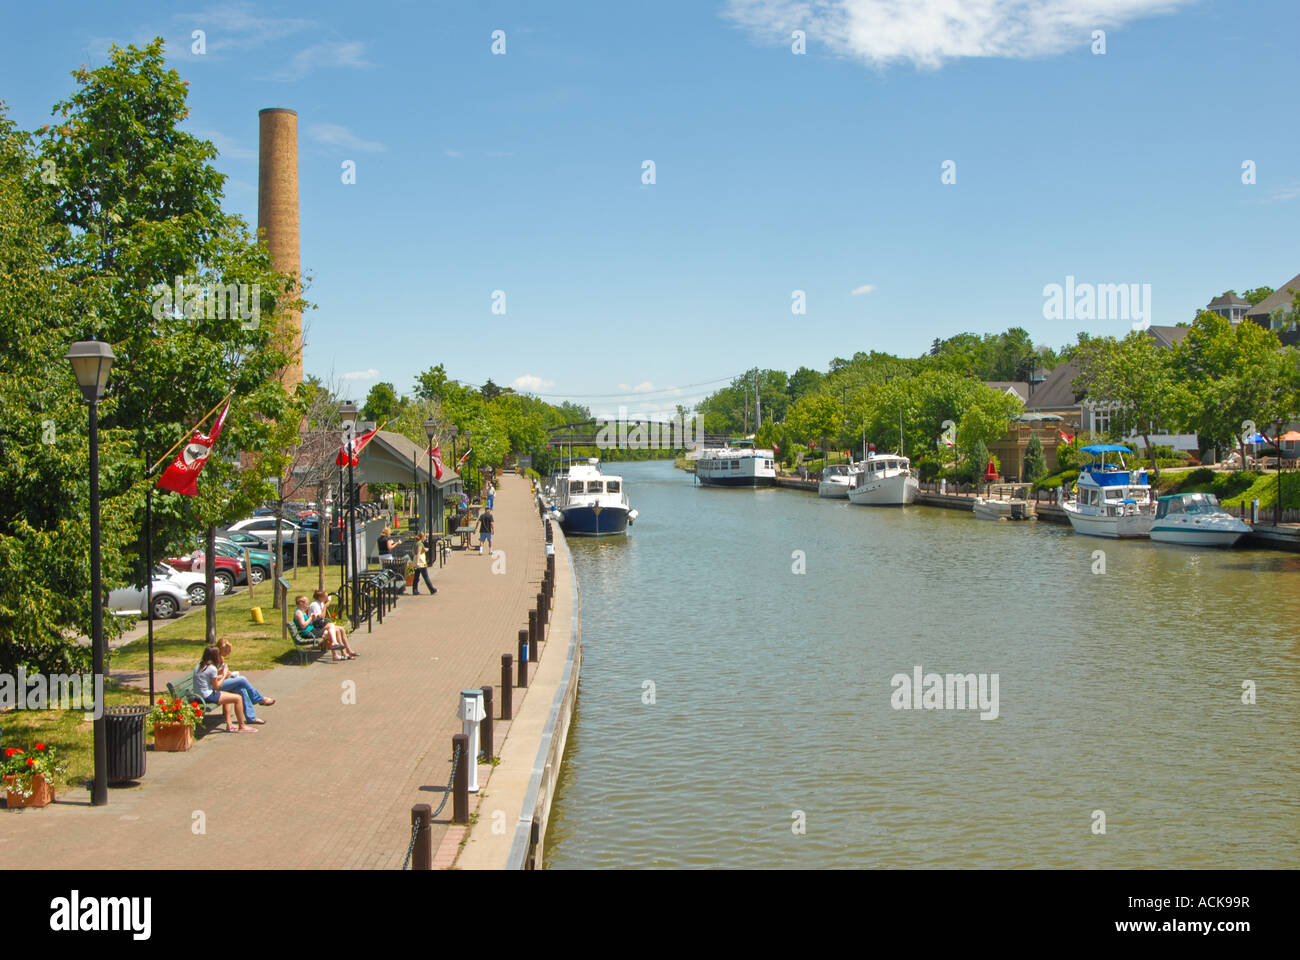 Erie Canal, Fairport NY USA Banque D'Images